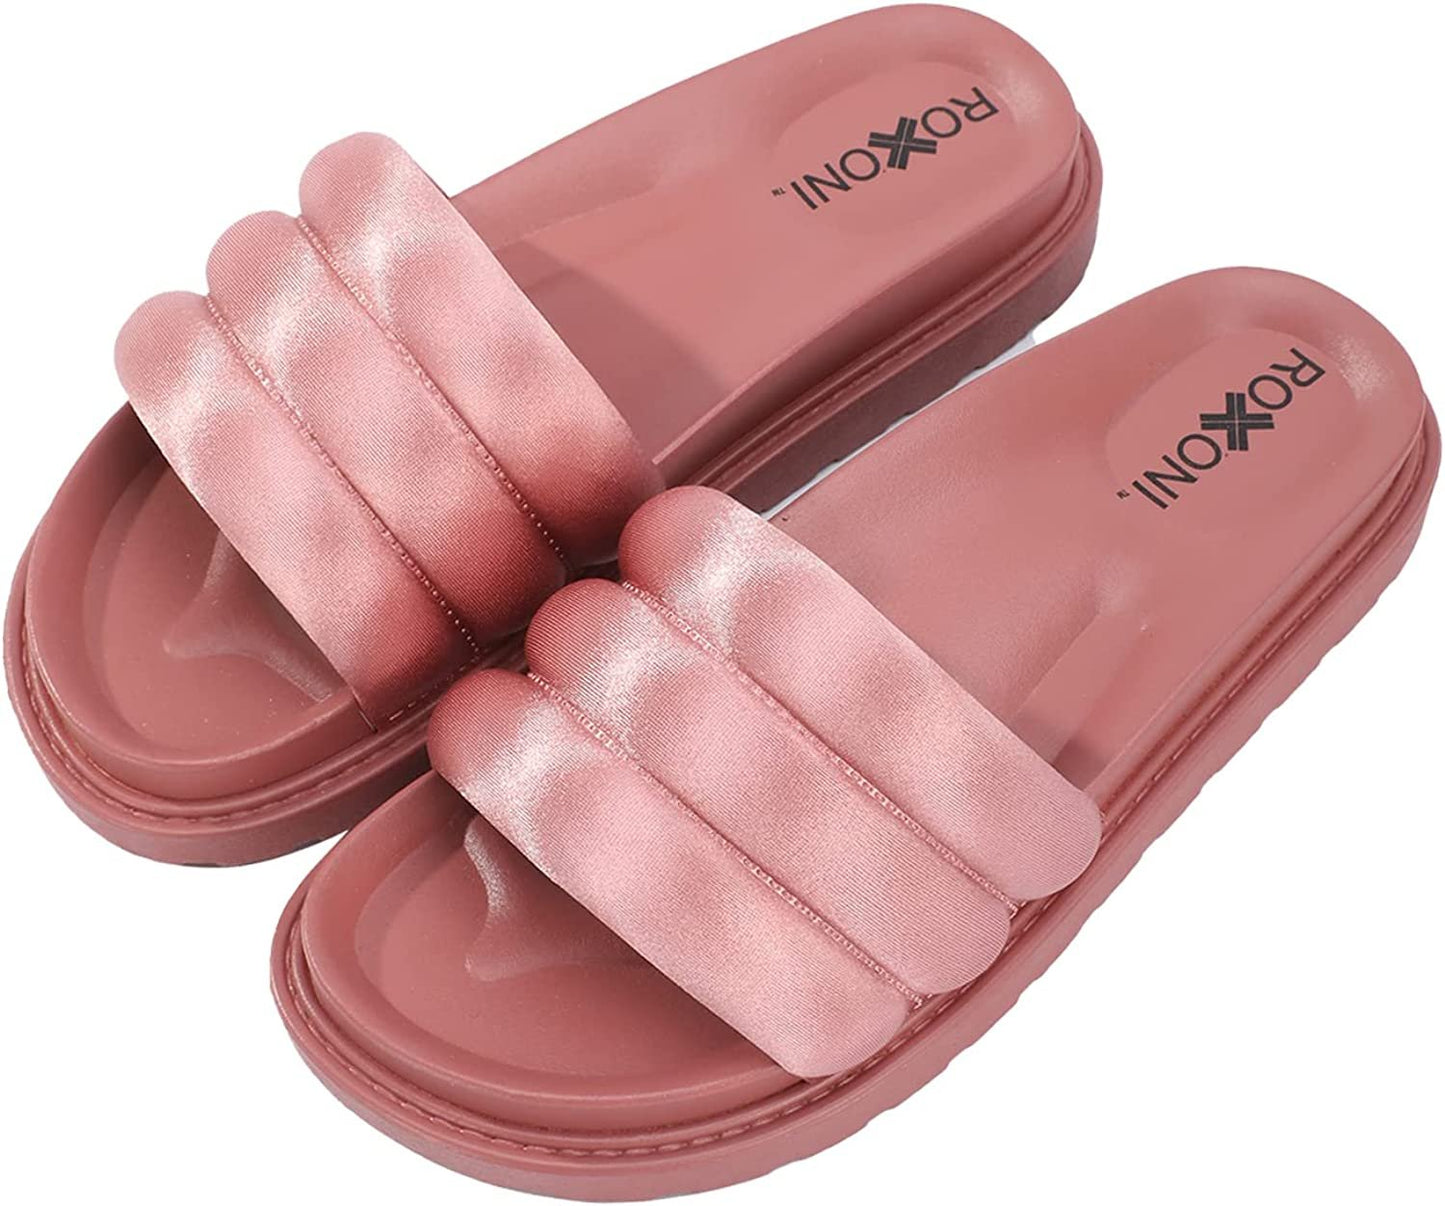 Women’s Padded Strap Slide Sandals; Stylish Open Toe Sandals in 4 Fashionable Colors